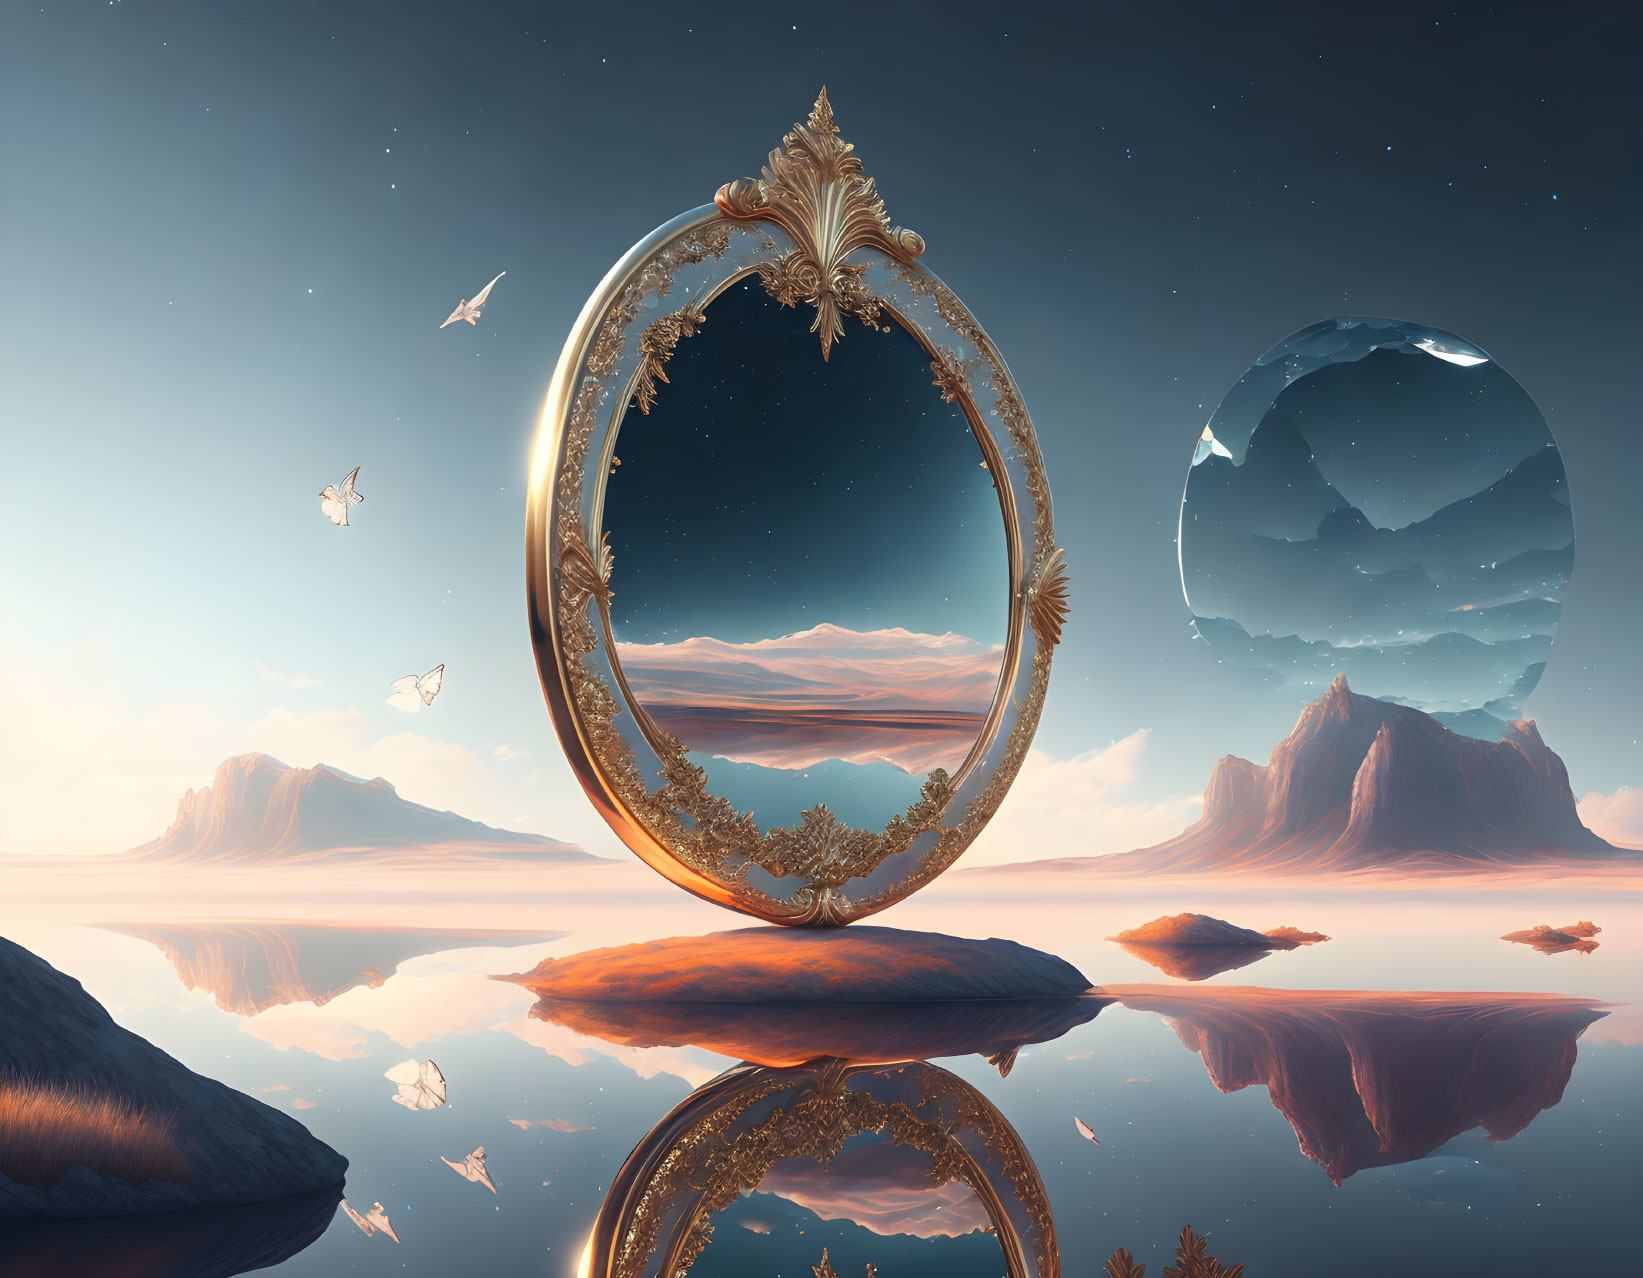 Surreal landscape with ring mirror, mountains, water, butterflies